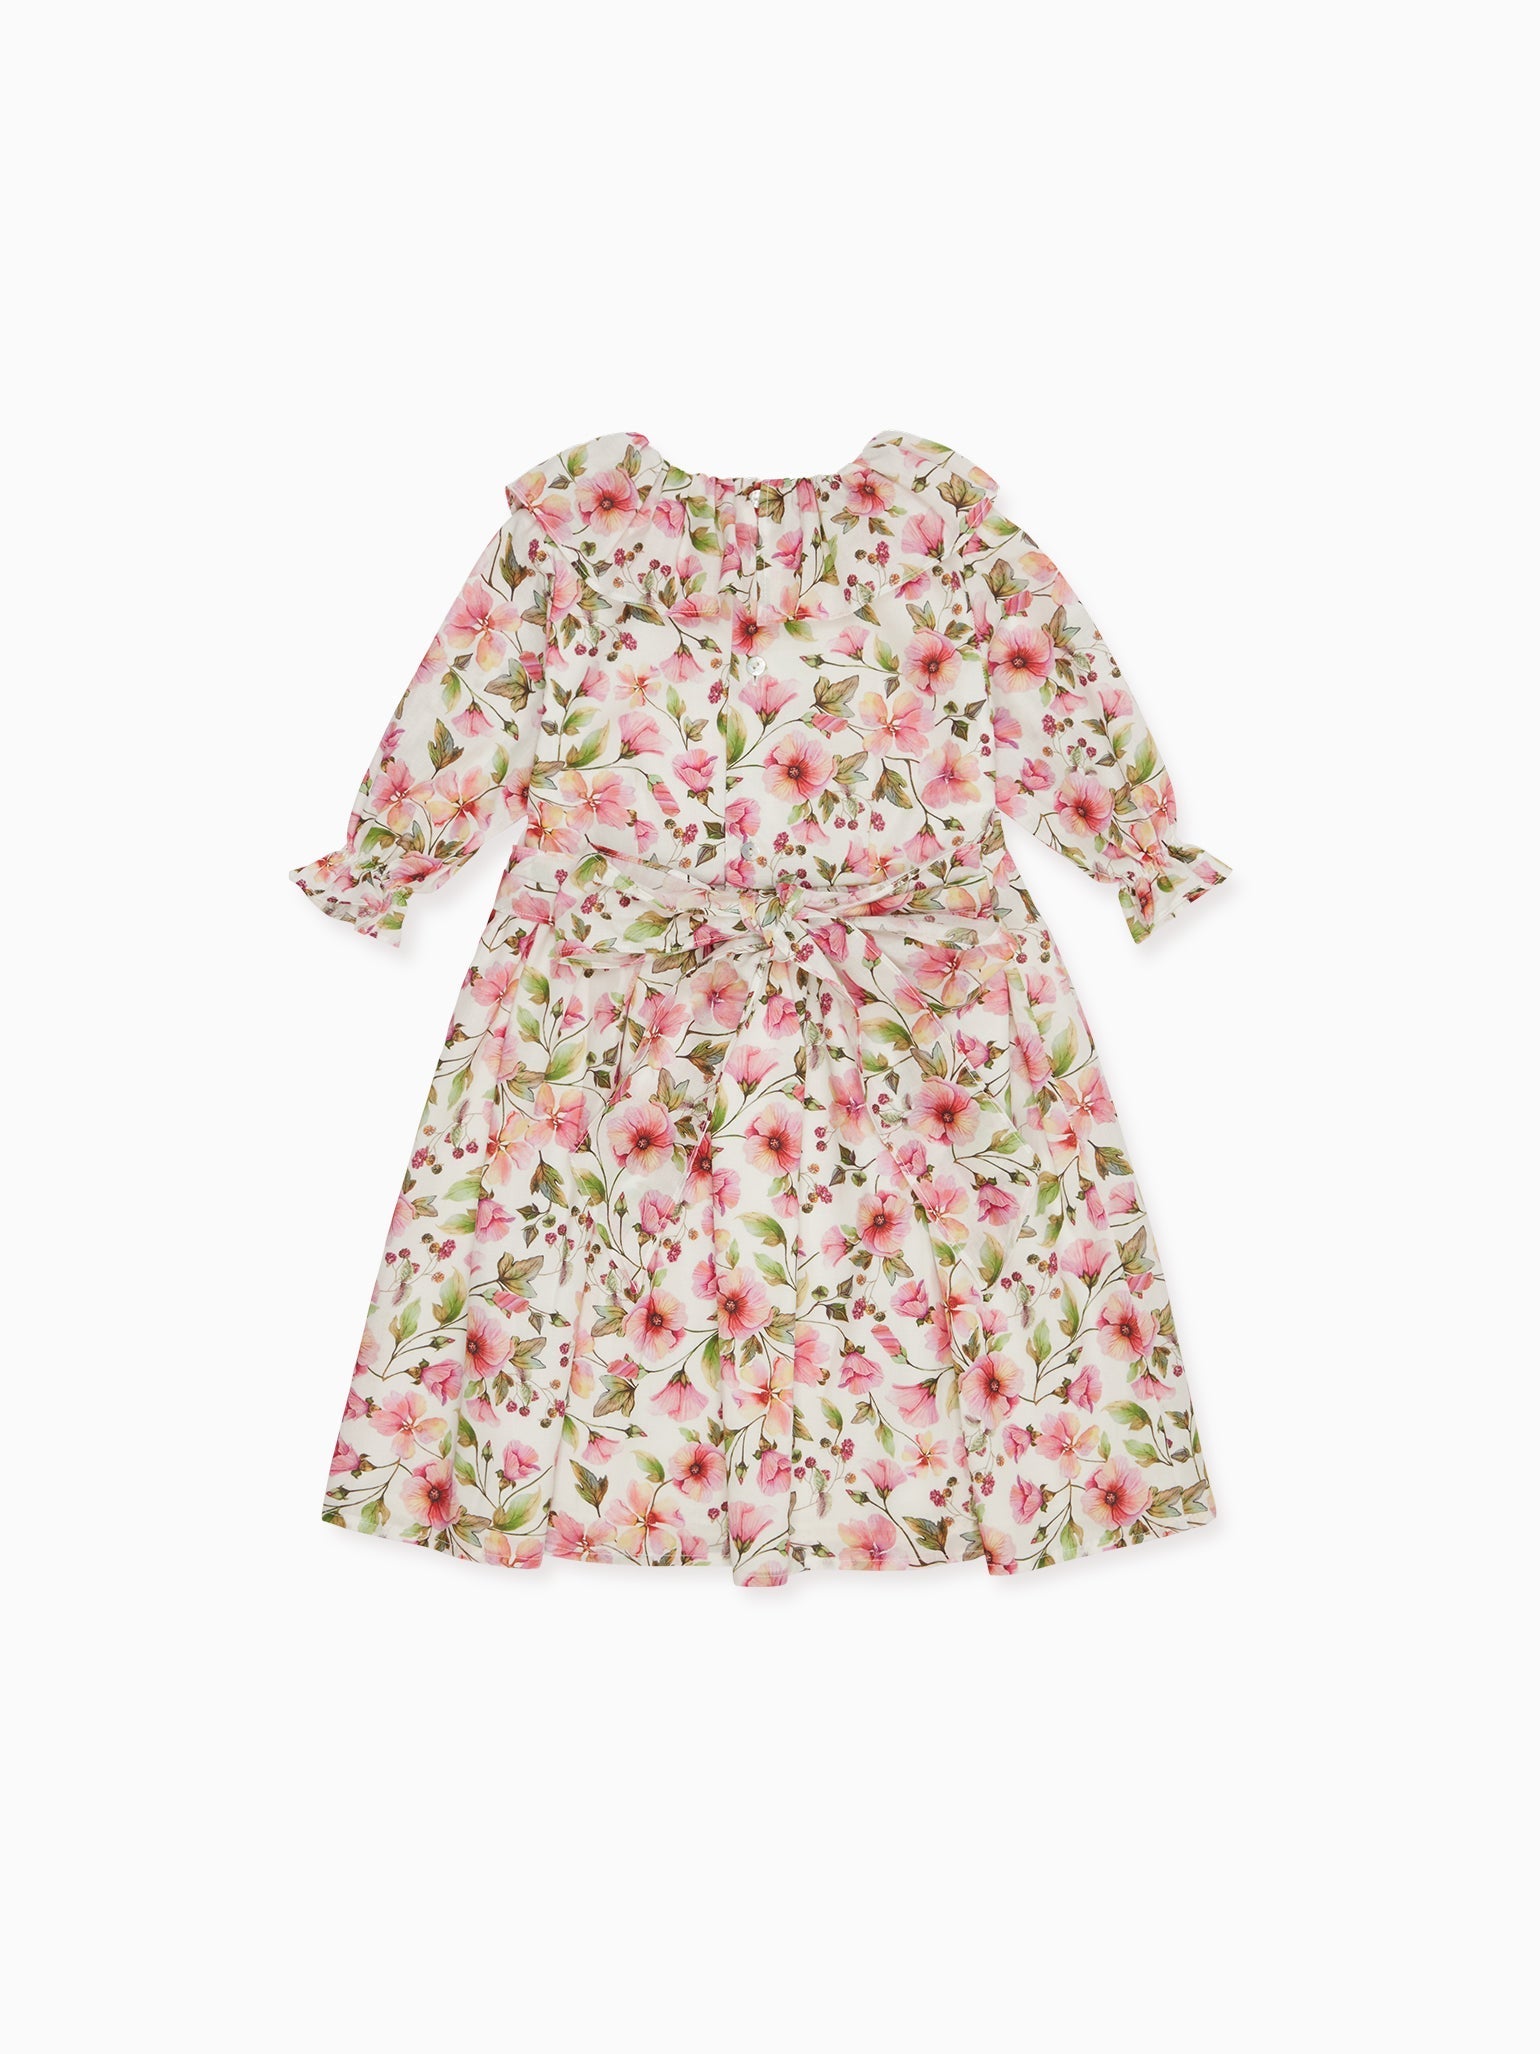 Pink Floral Martina Girl Fit And Flare Dress